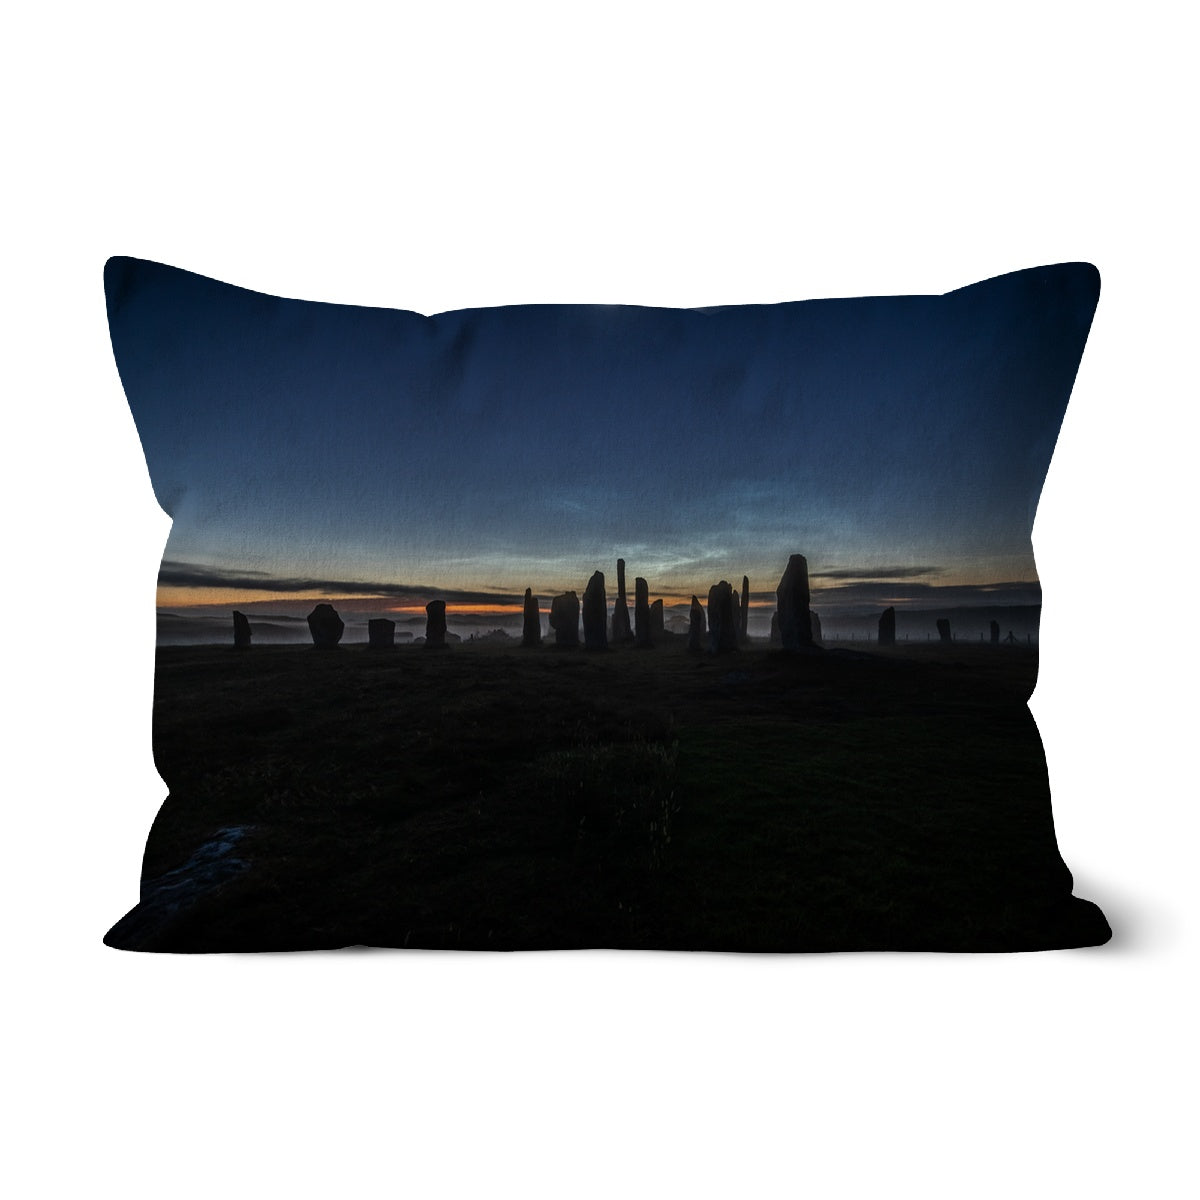 Callanish Stones and Noctilucent Clouds Cushion